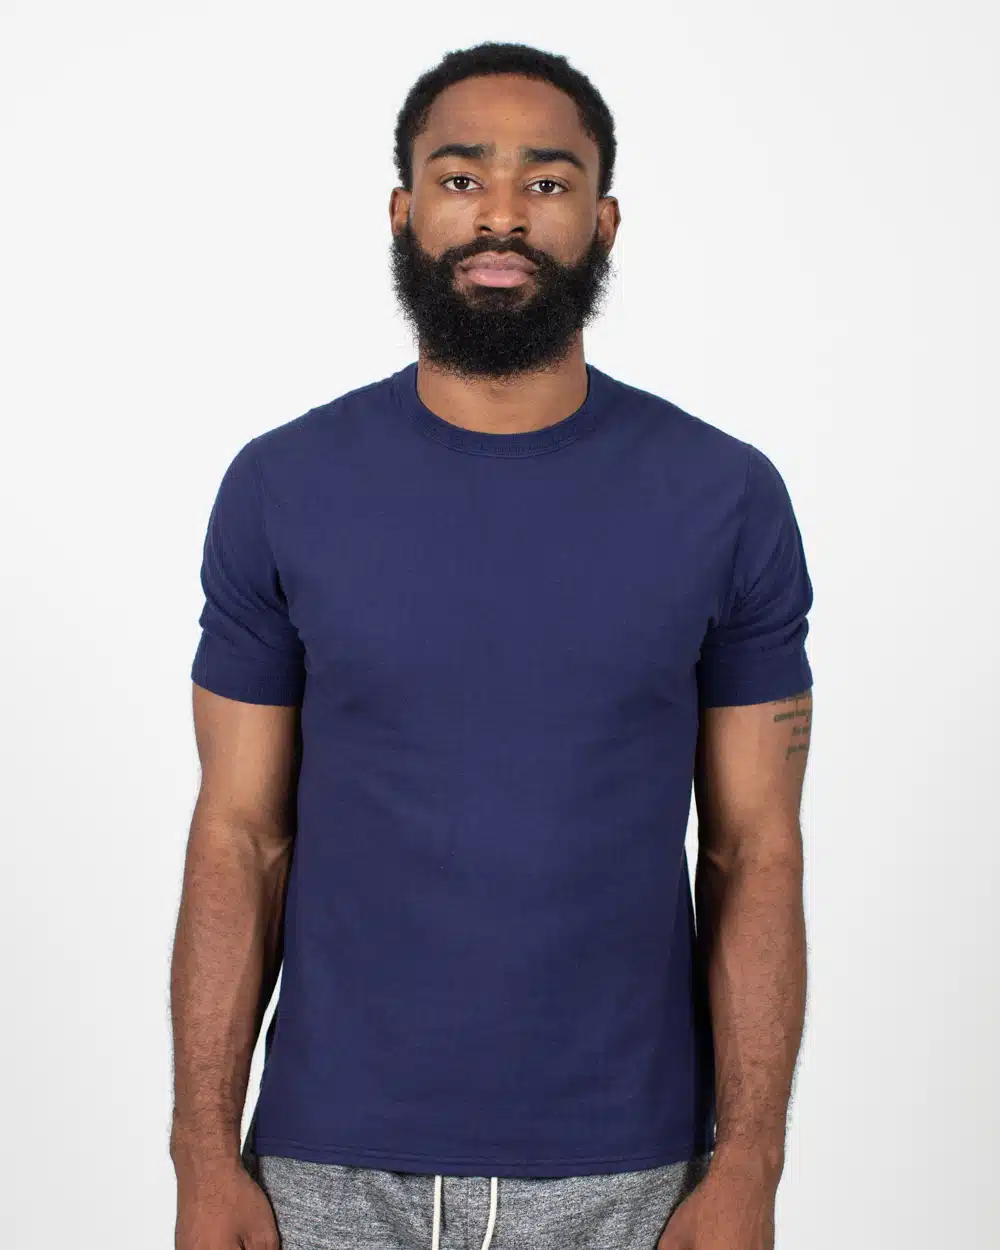 Loop & Weft Ribbed Military Crewneck - French Navy Blue